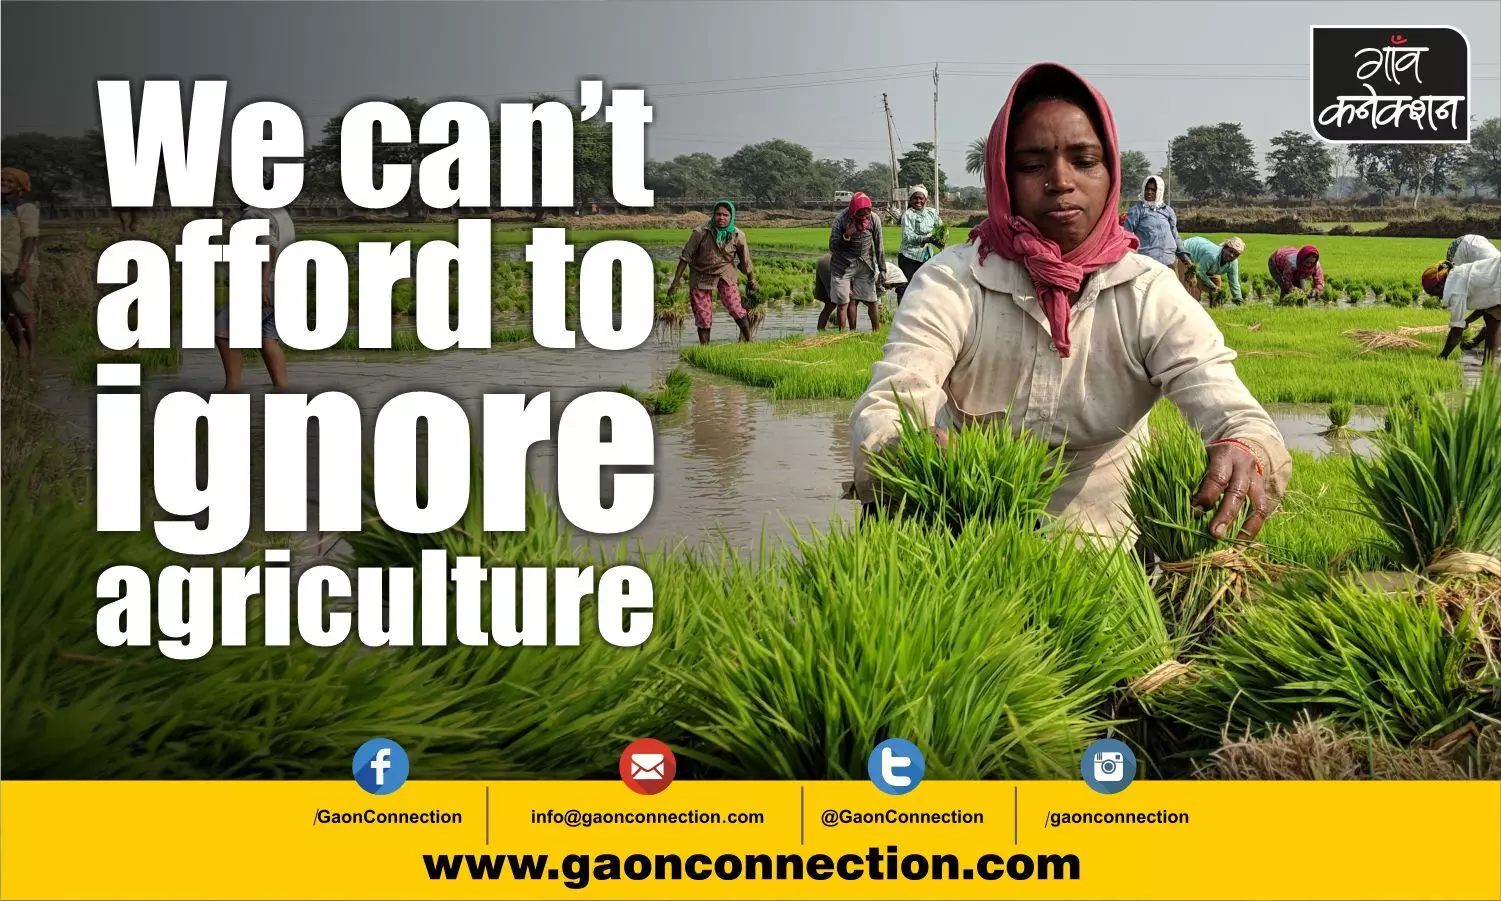 There shall be no new India without Bharat and agriculture